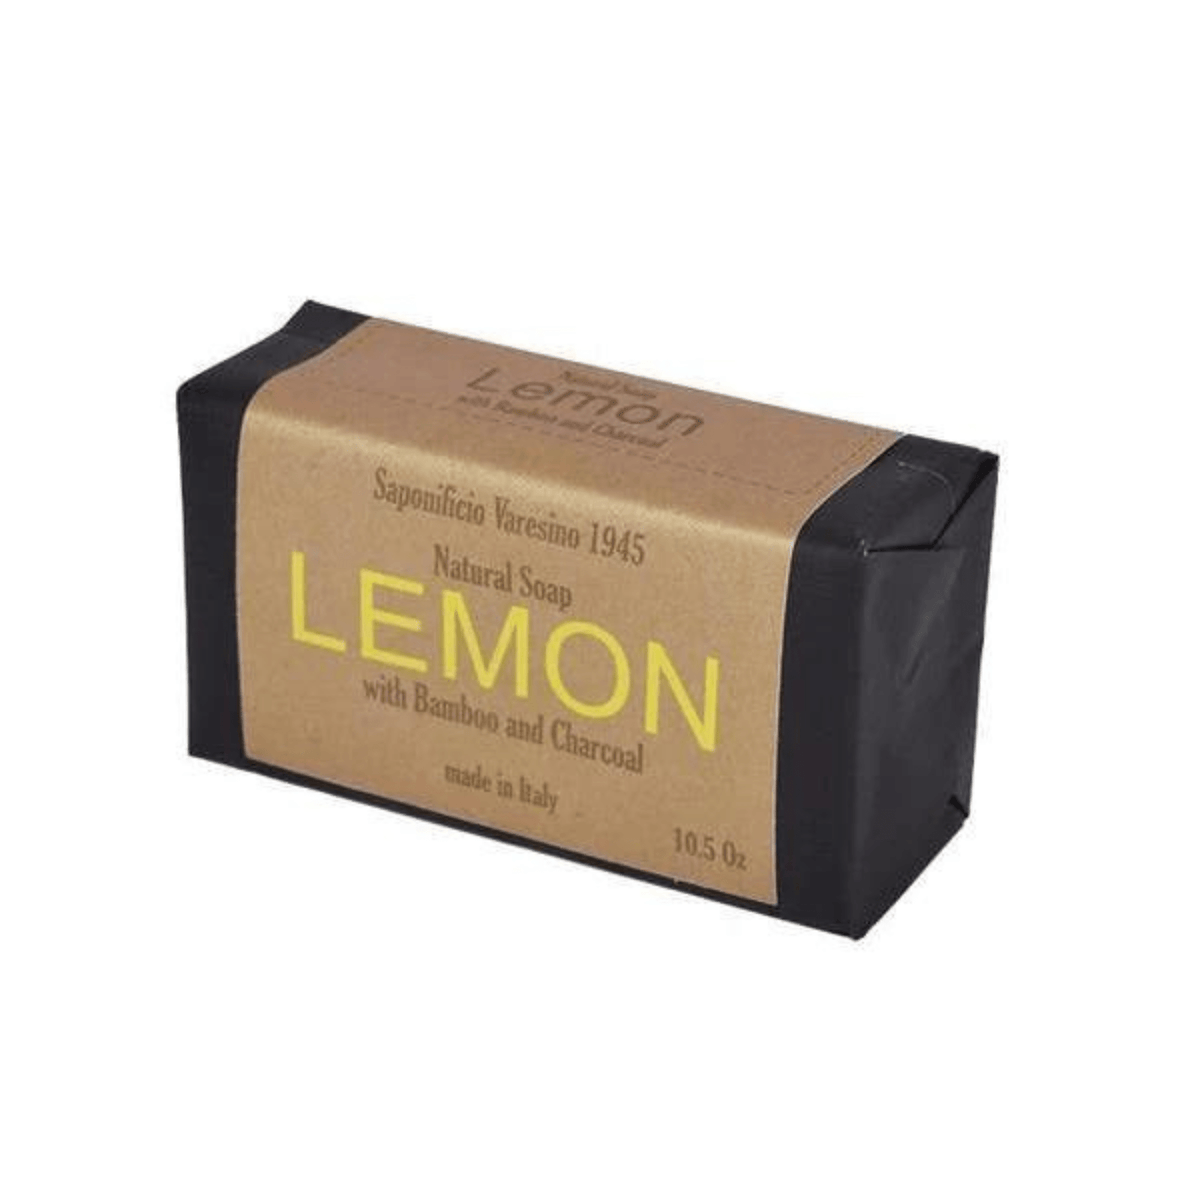 Primary Image of Lemon Soap with Bamboo and Charcoal